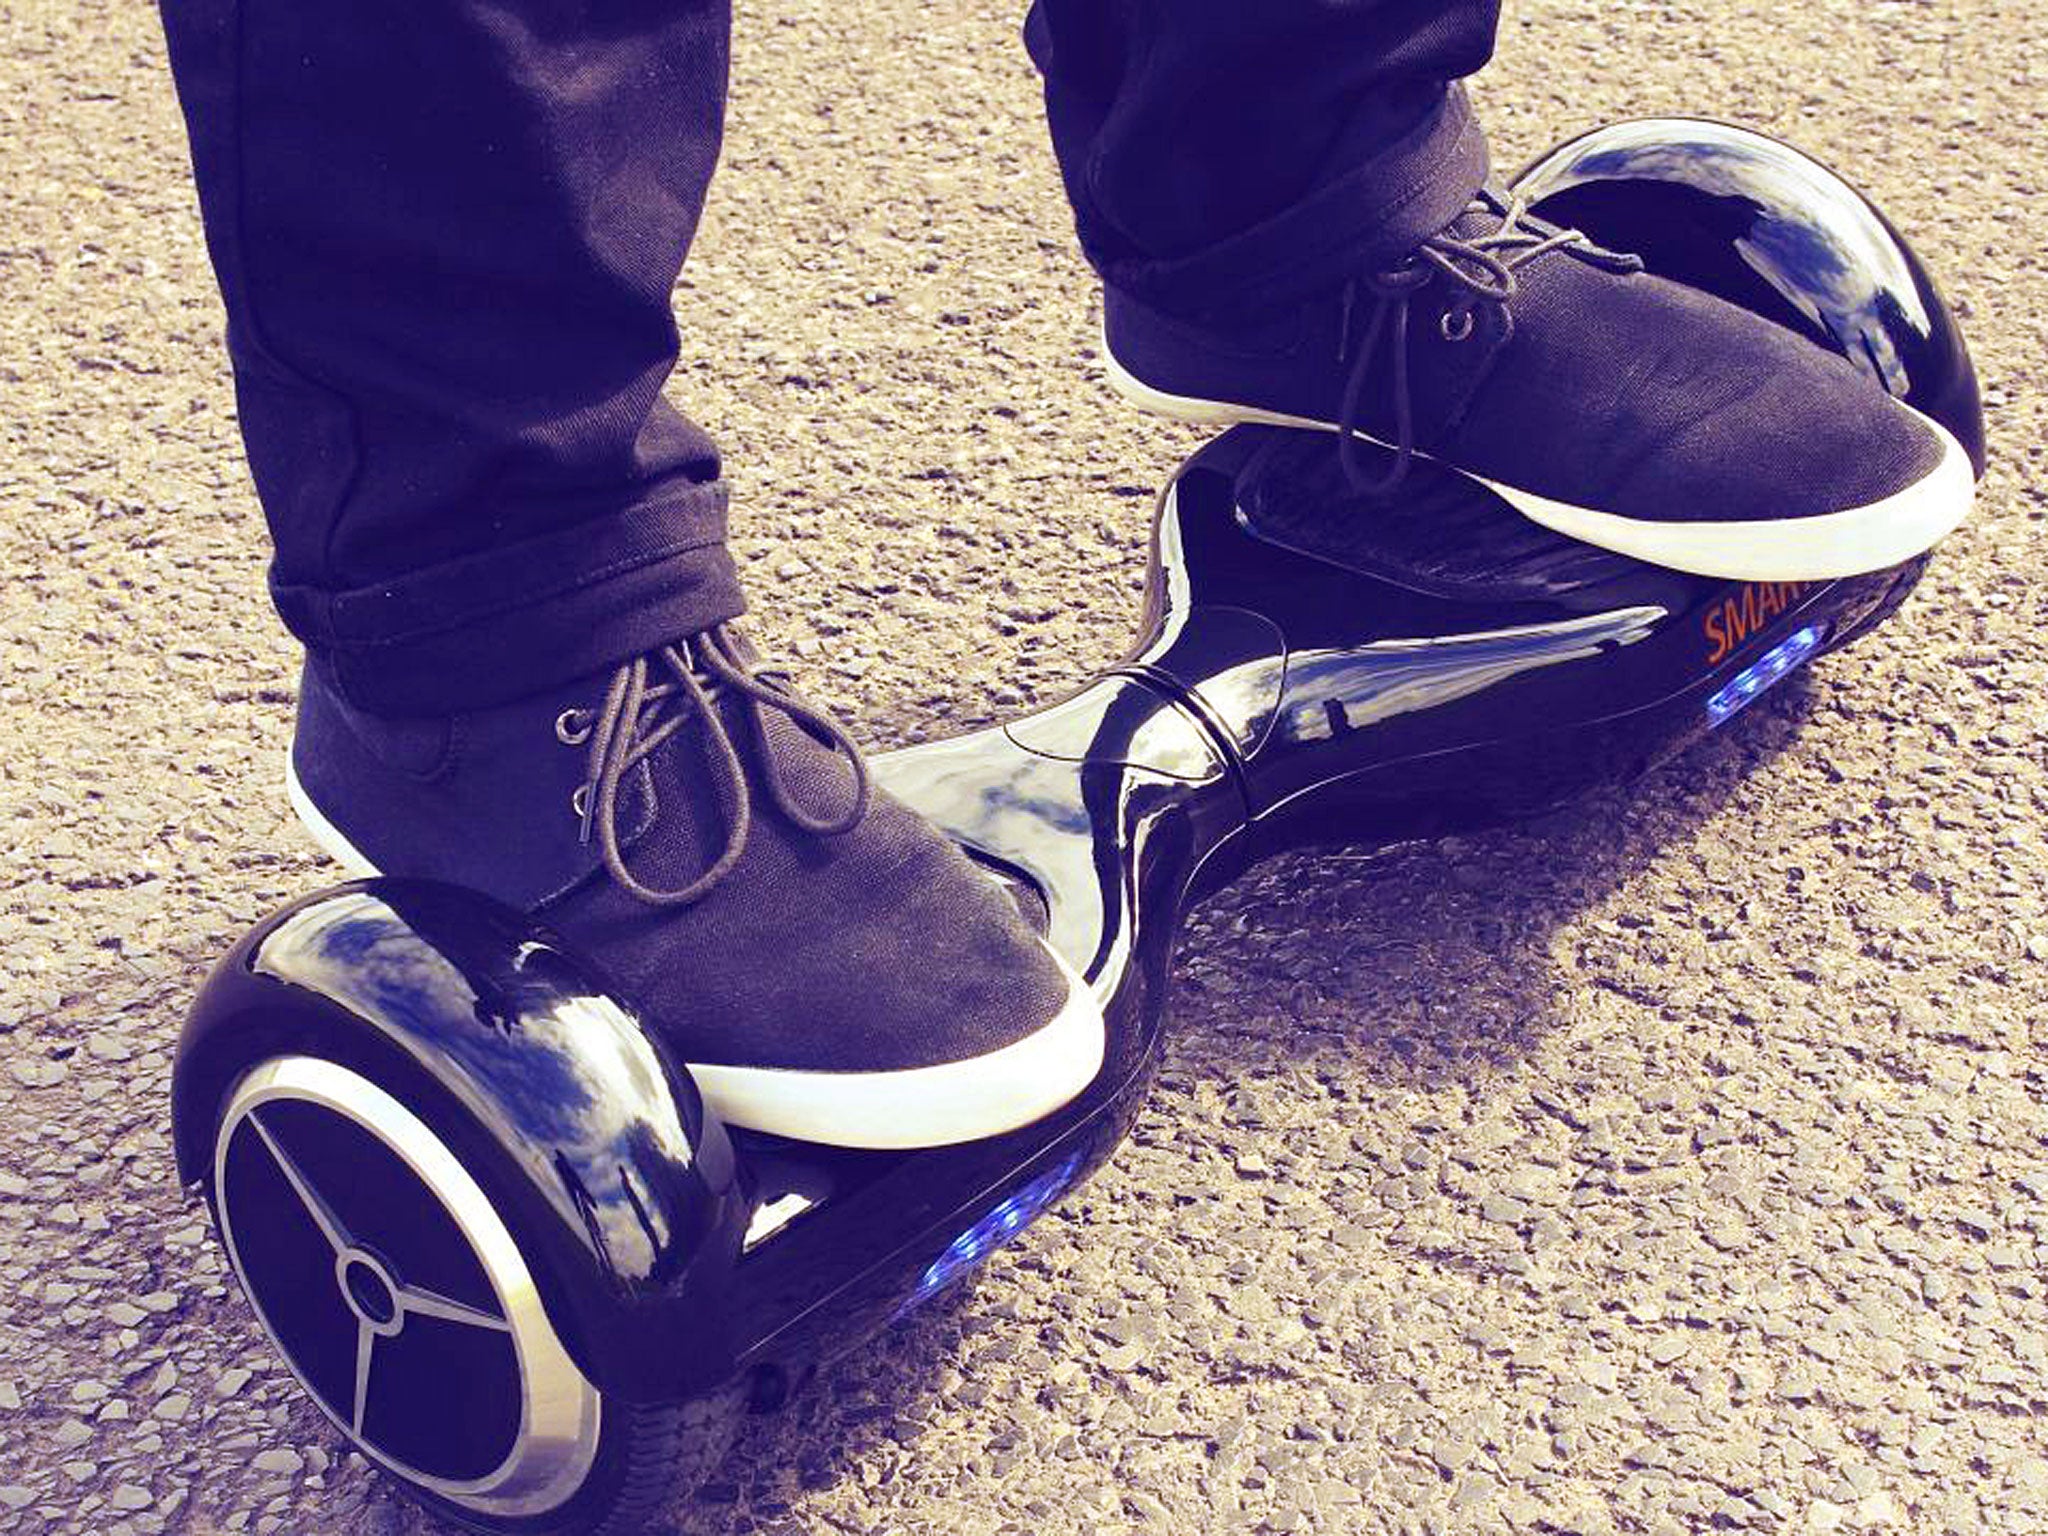 Hover boards can only be used on private land in the UK